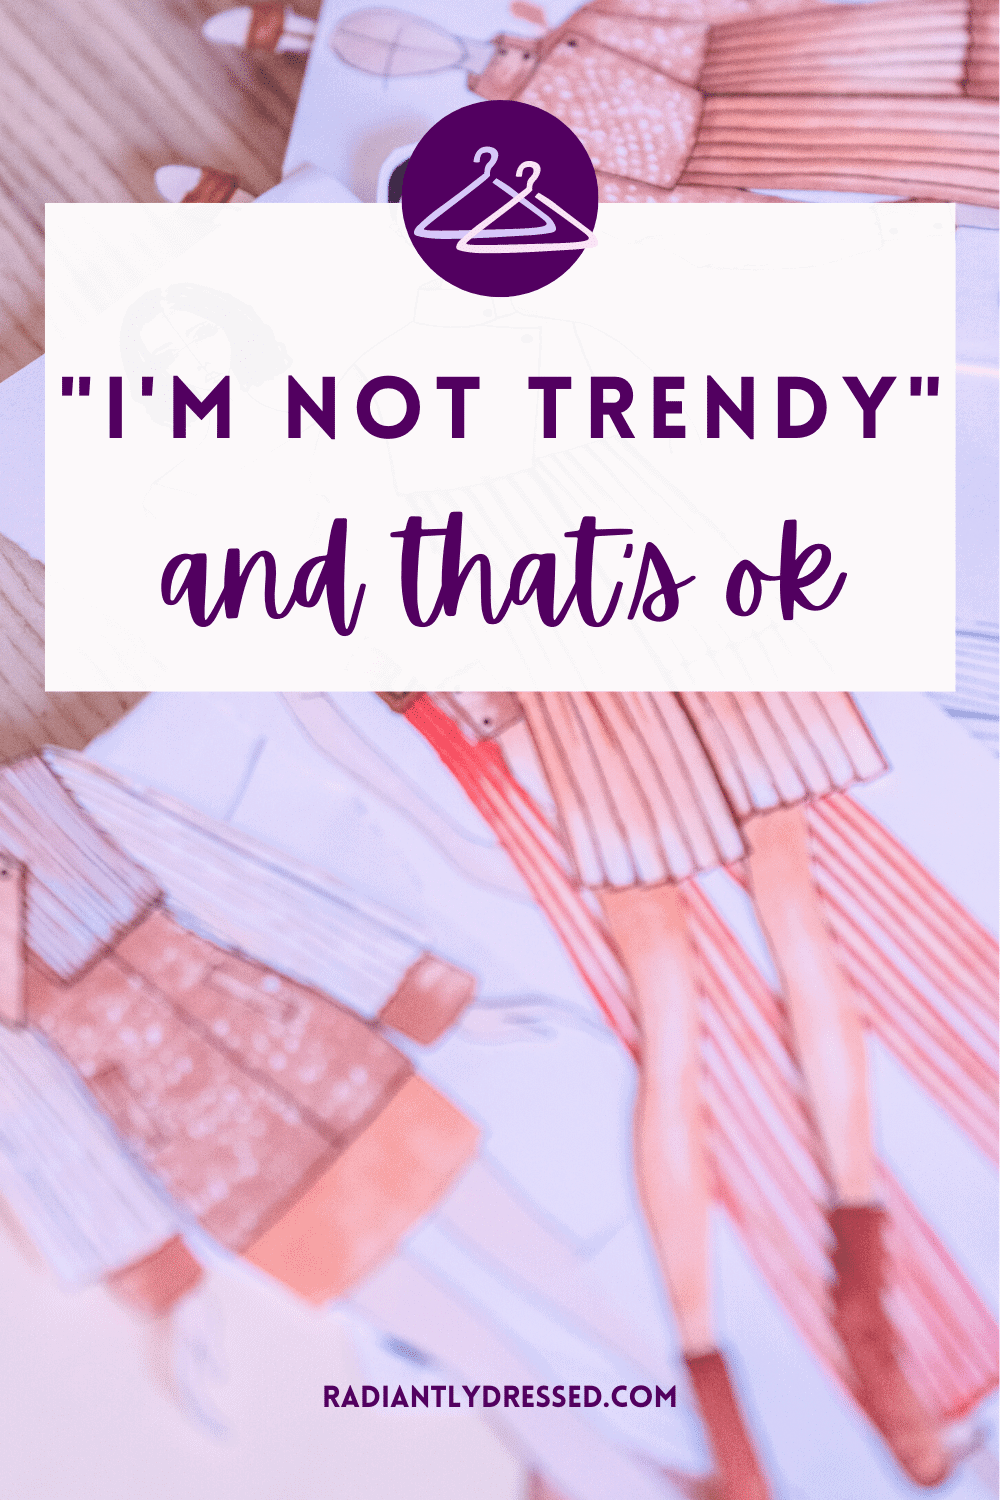 I'm not Trendy and that's oik